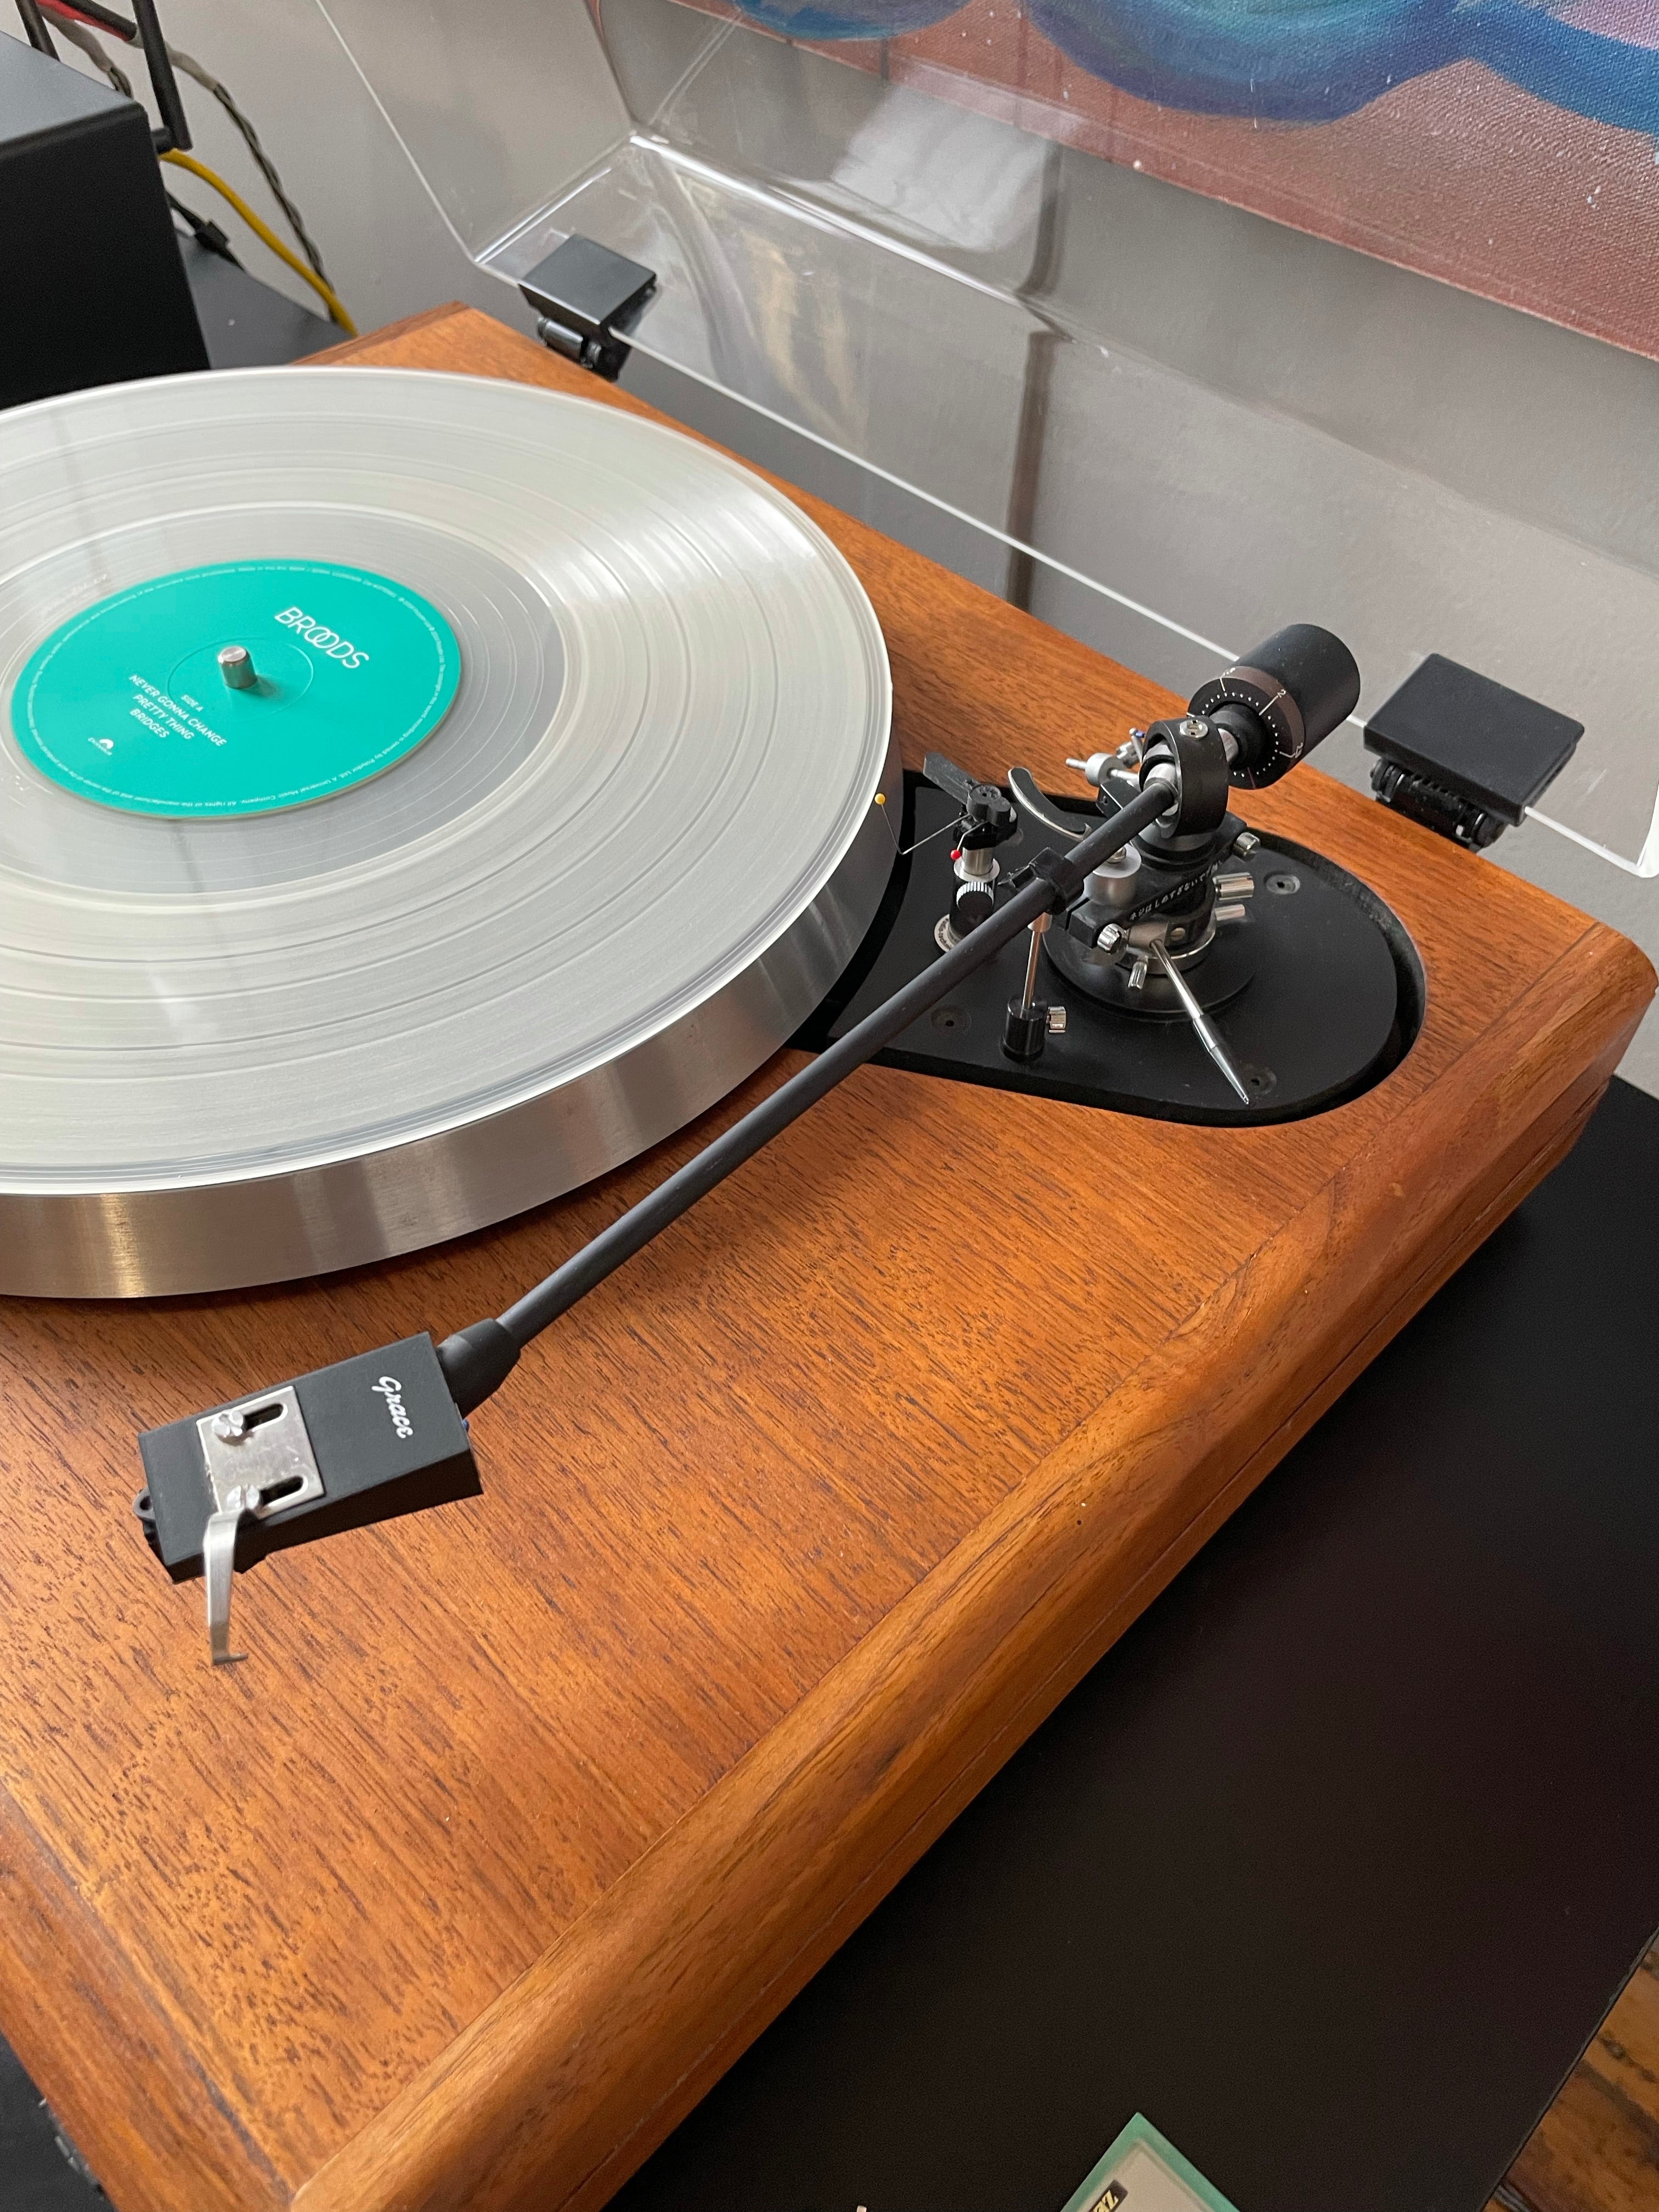 Acoustic Research "The Turntable" with Grace 707 Tonearm - SOLD